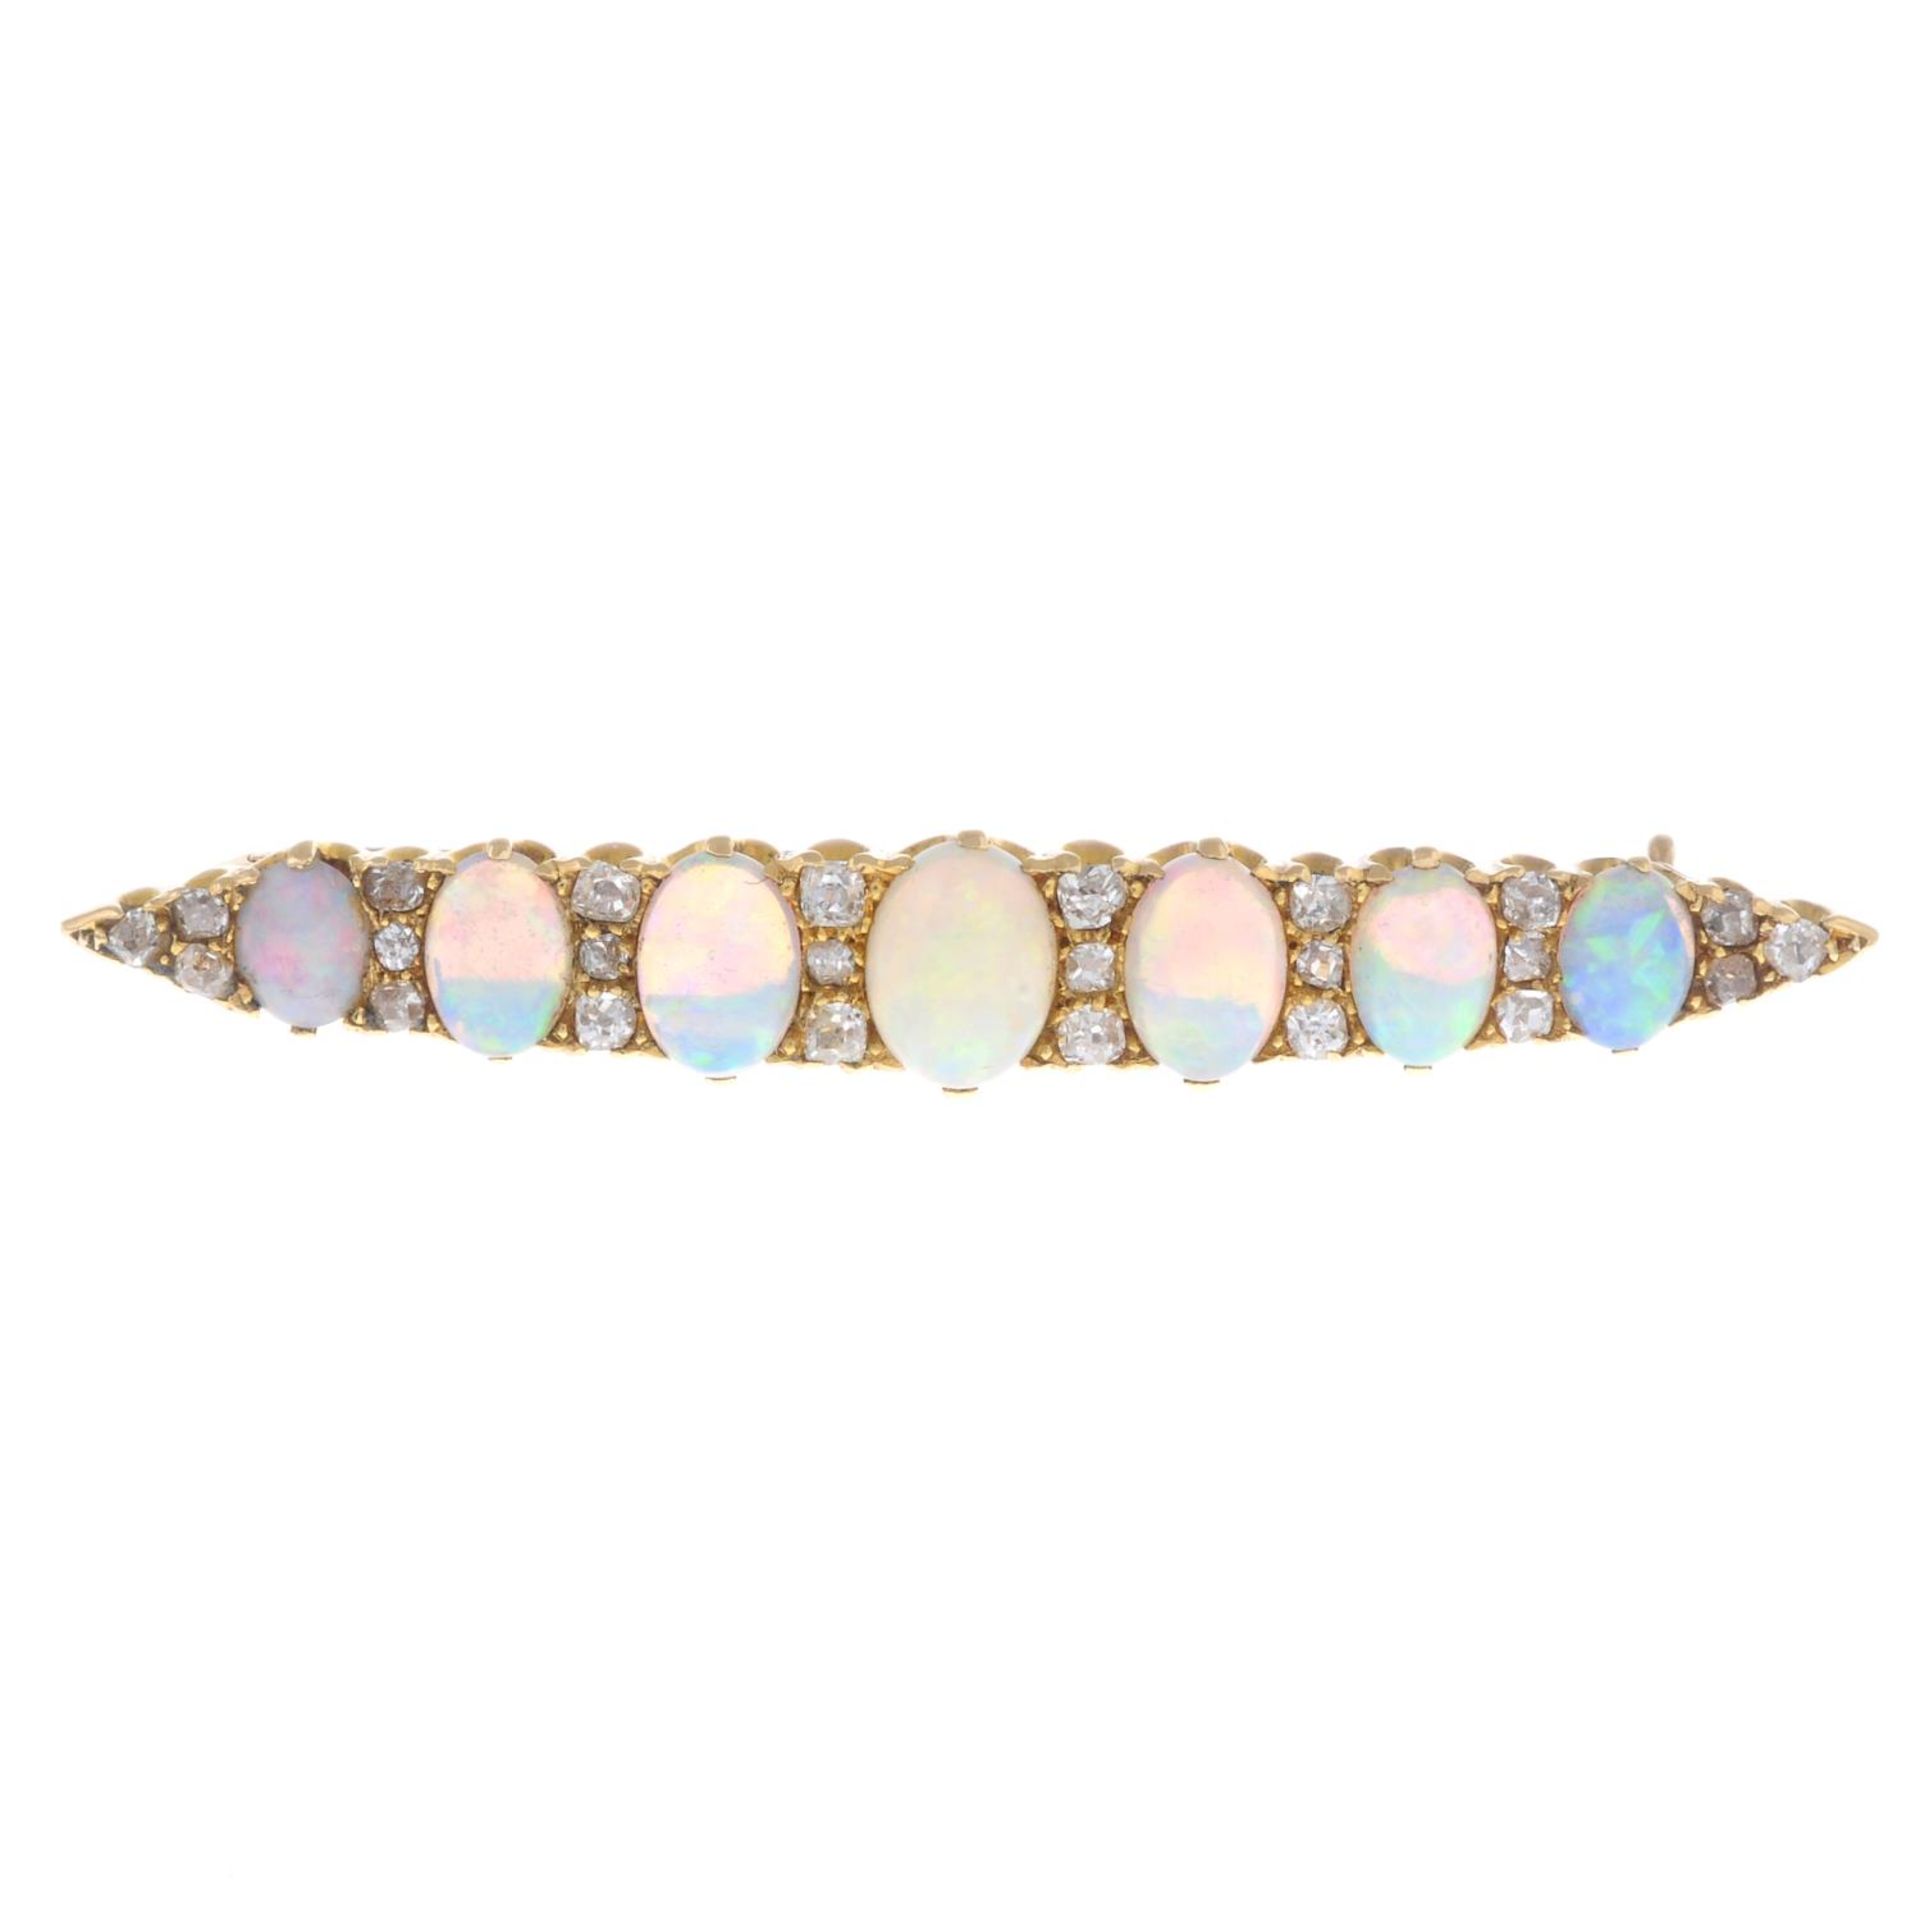 An early 20th century gold opal and diamond brooch.Estimated total diamond weight 0.35ct.